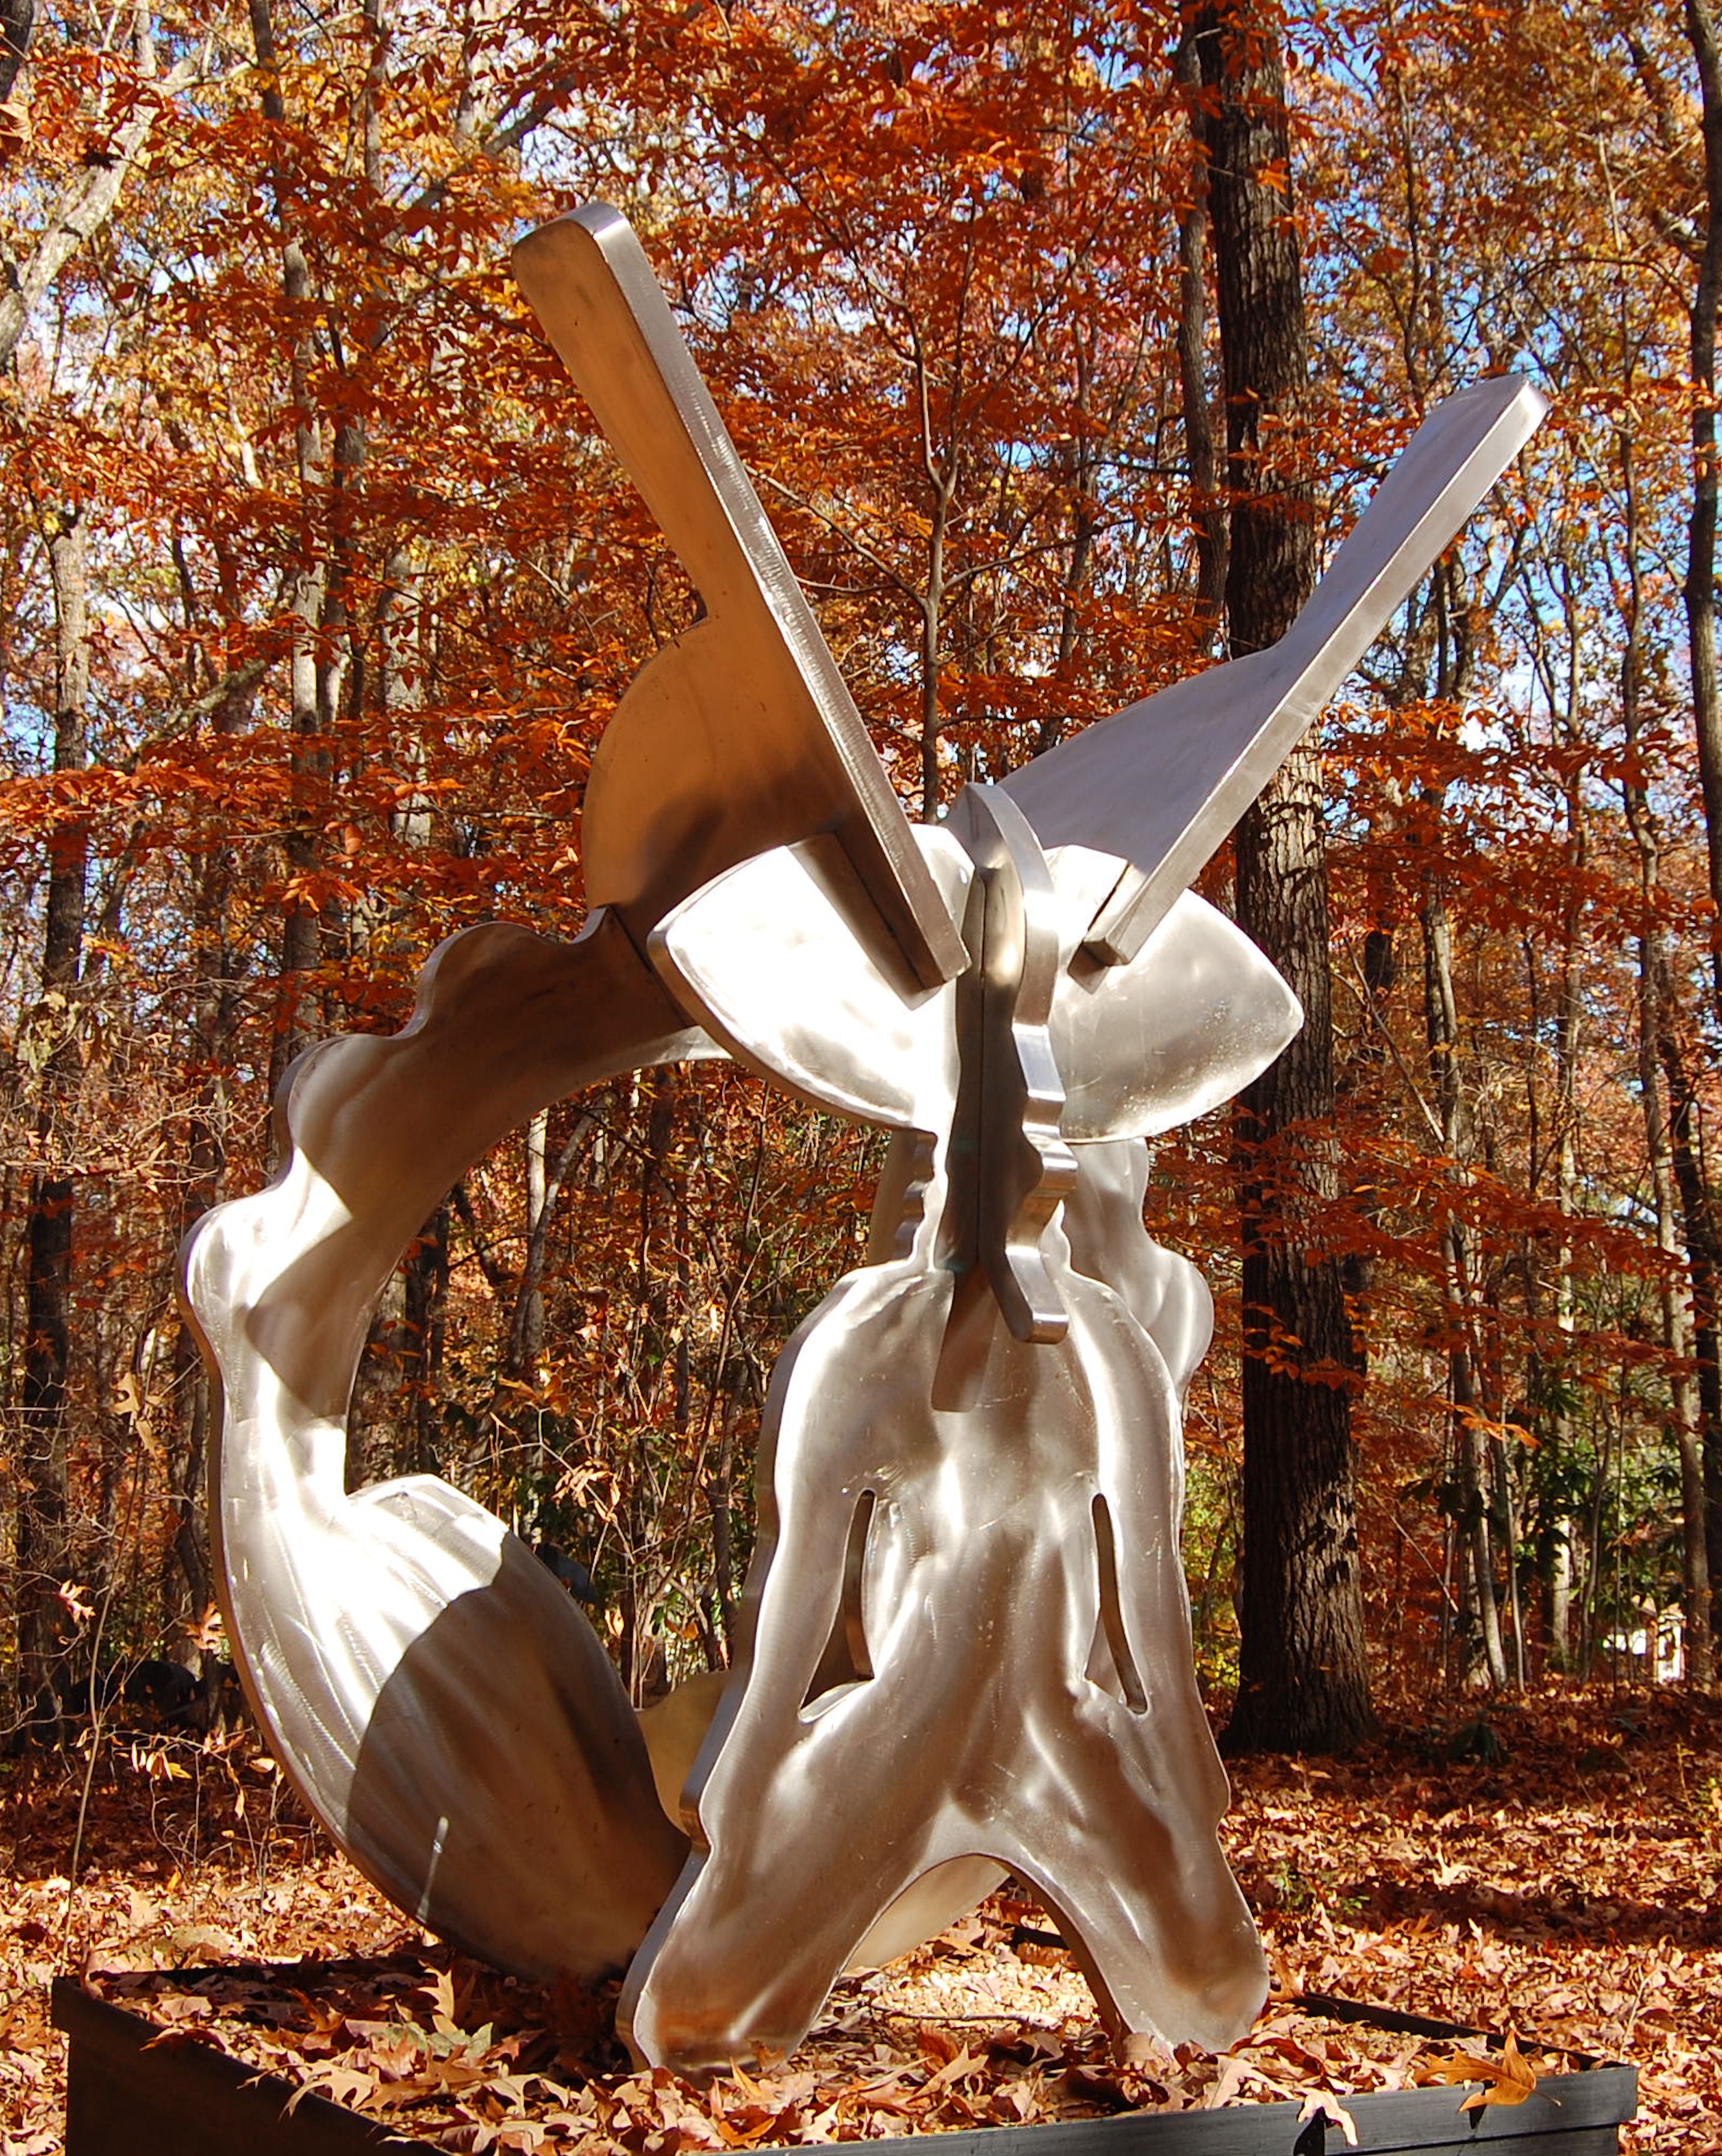 Shungo's Approach - 2013, Fabricated Stainless Steel, 48" x 48" 77"
